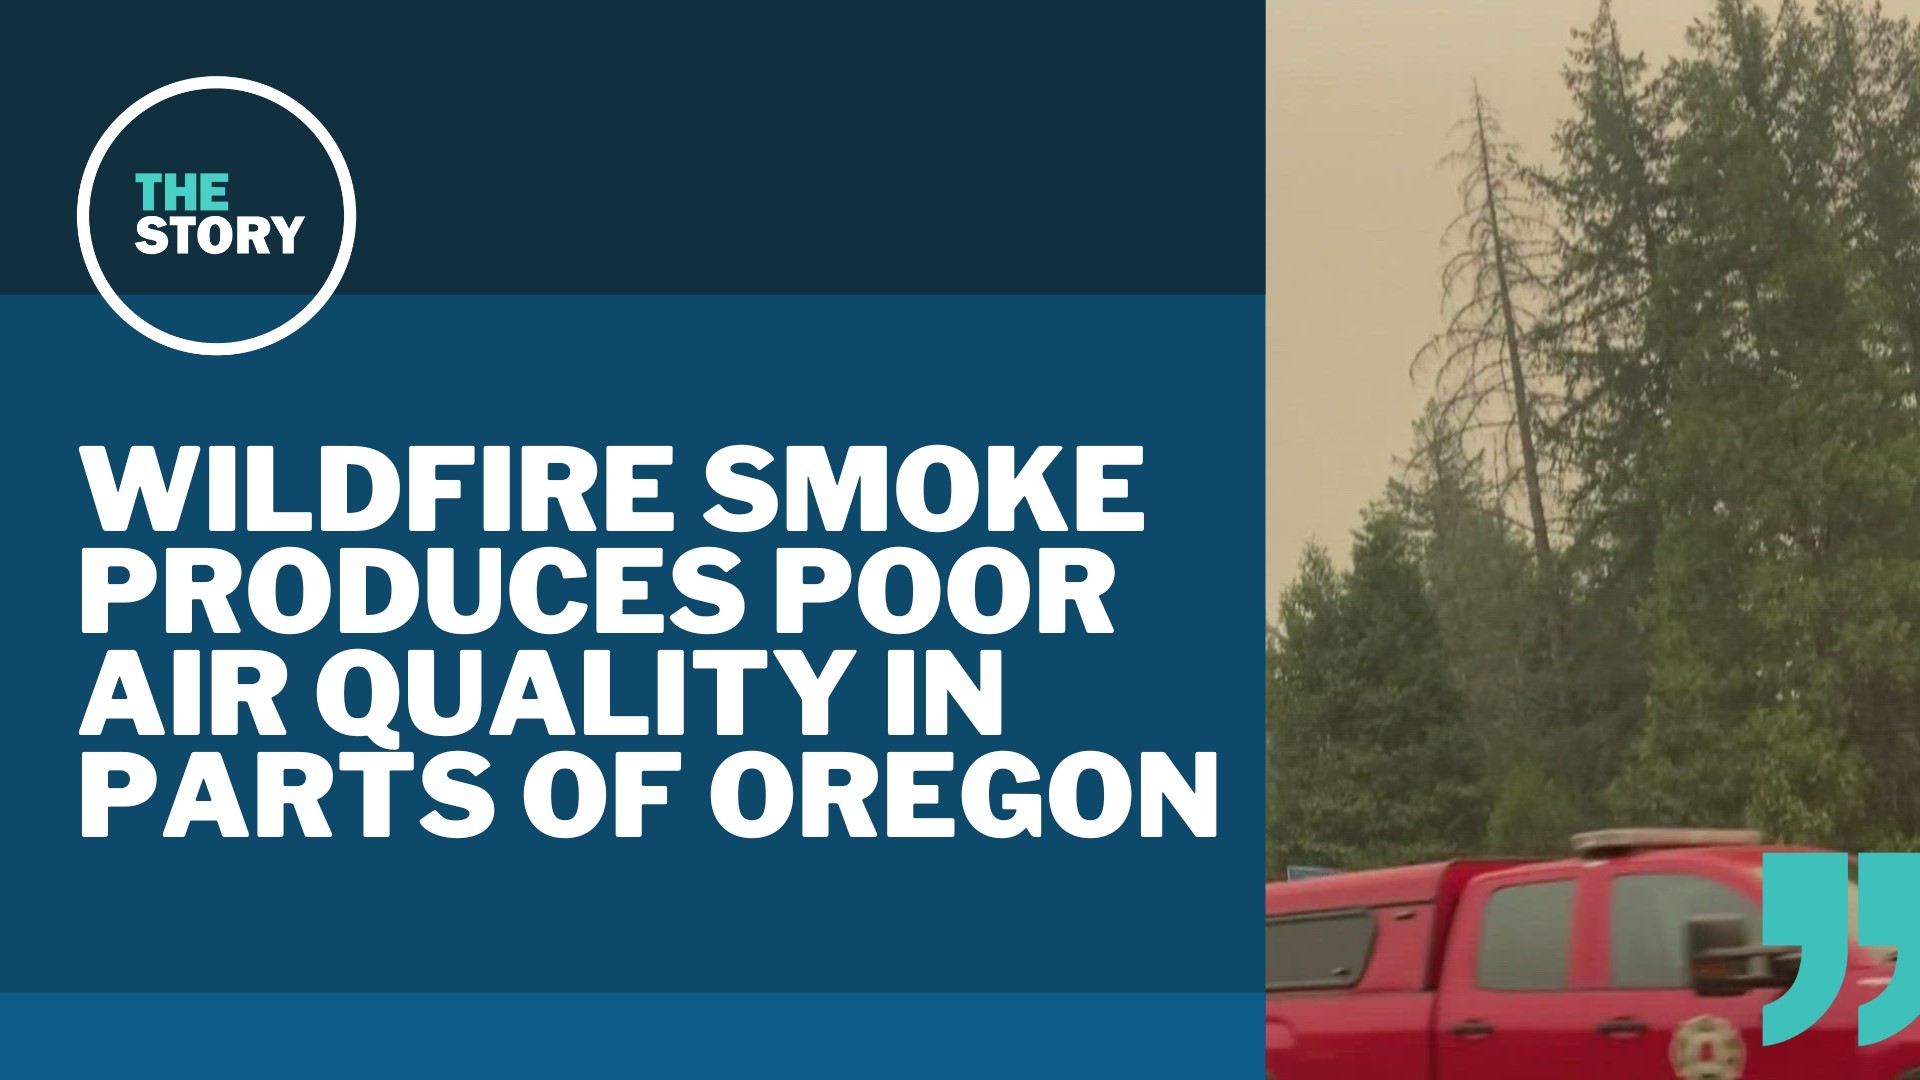 In the Portland metro area, some spots are seeing unhealthy air quality. But the worst areas are in central parts of Oregon around Bend.